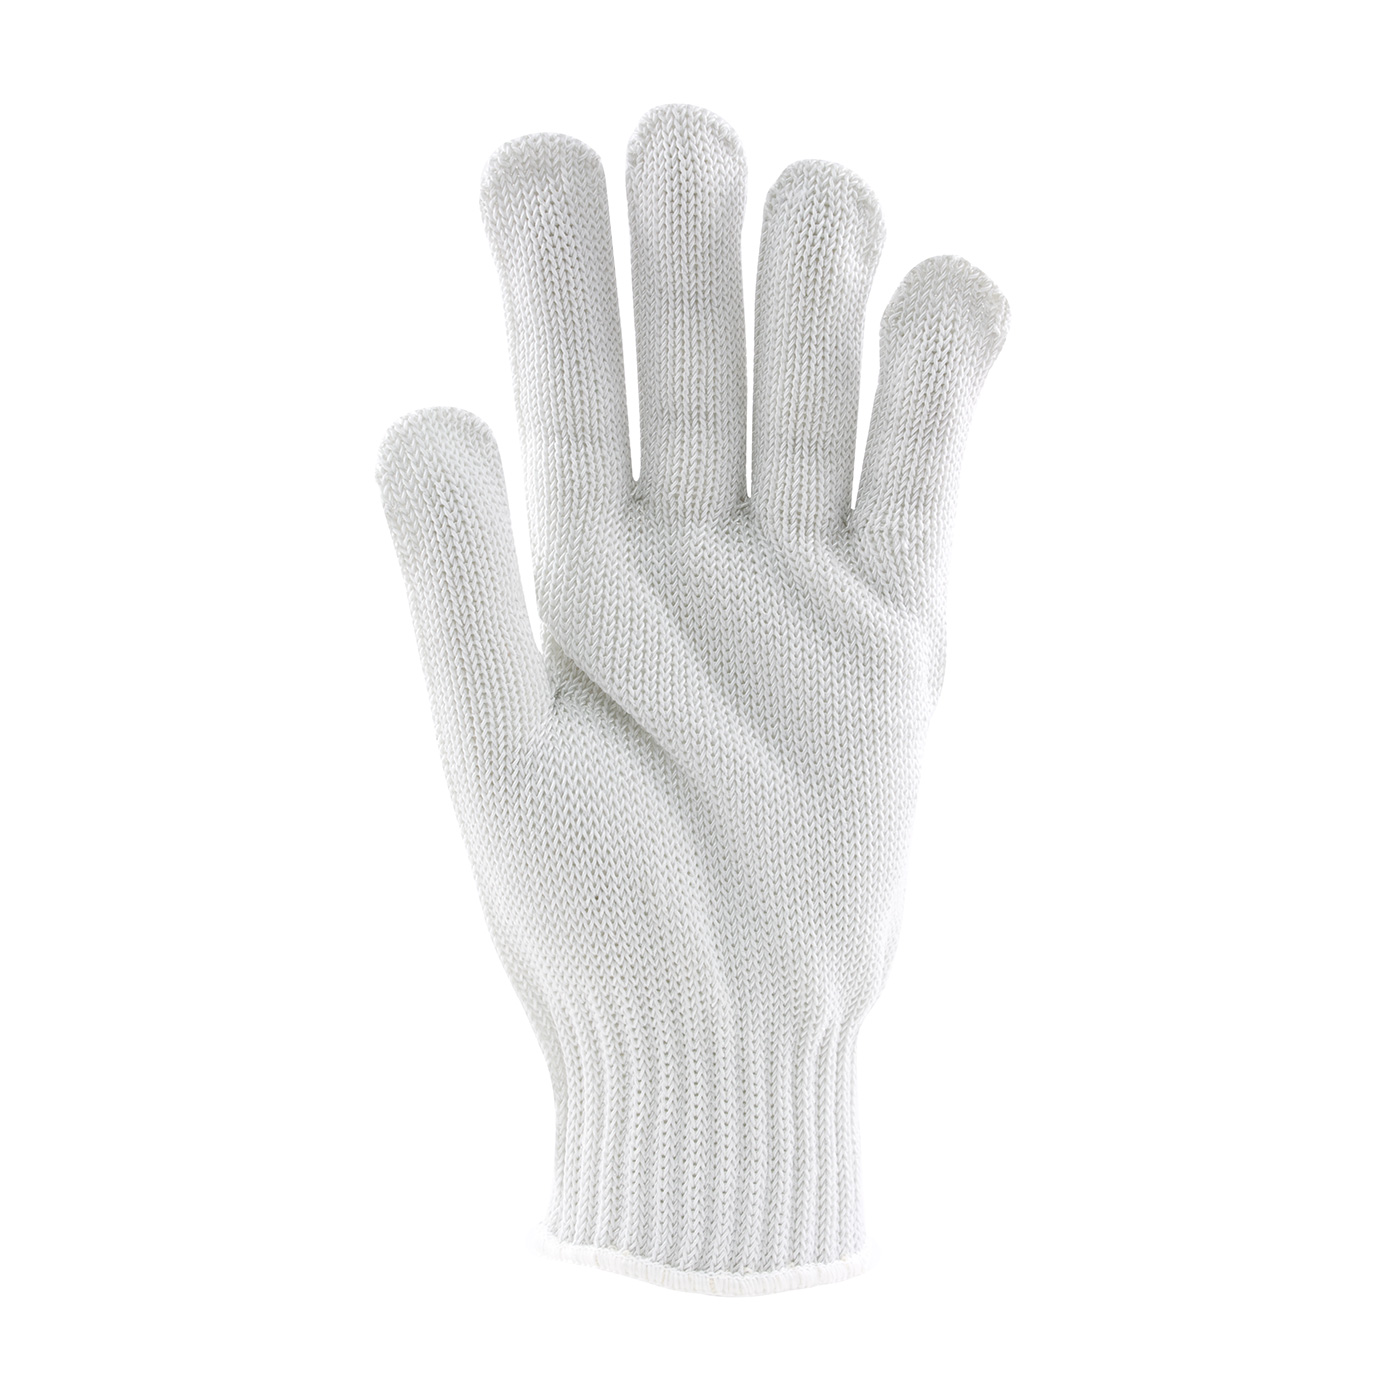 22-720 PIP® Claw Cover® Seamless Knit PolyKor® Blended Antimicrobial Glove - Medium Weight